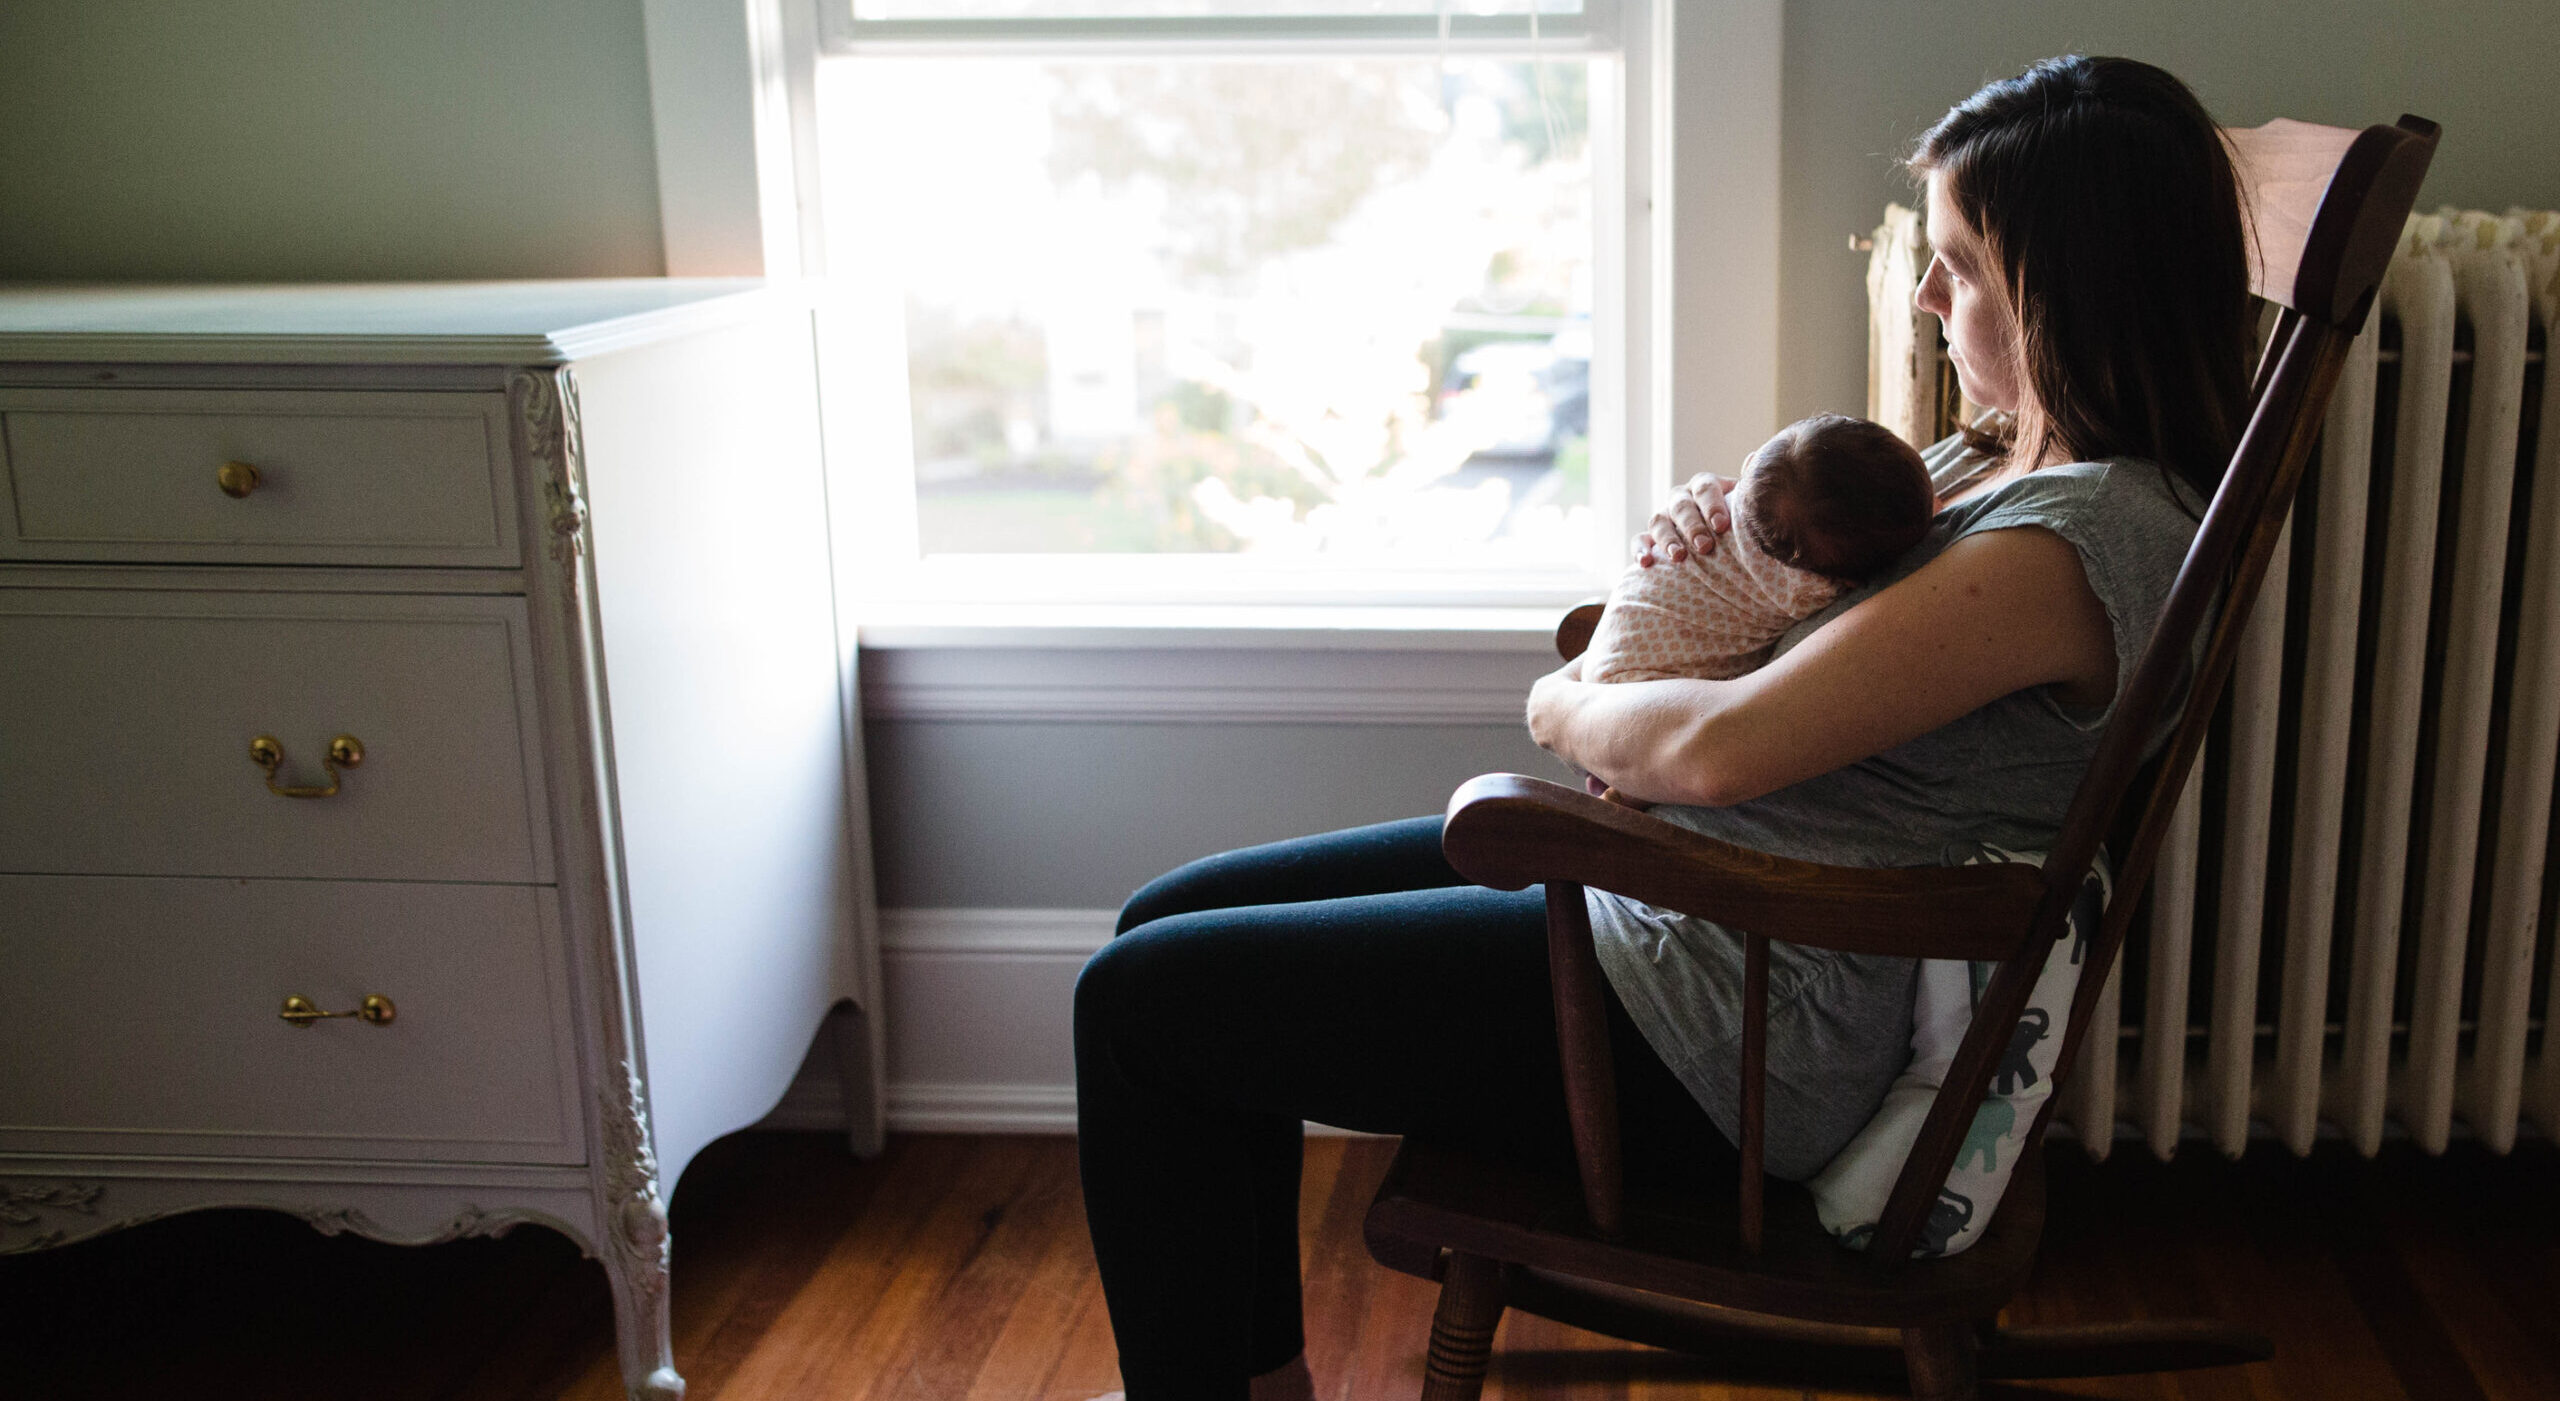 A young mother sits in a rocking chair looking out the window holding her infant in her arms. A heater is behind her.